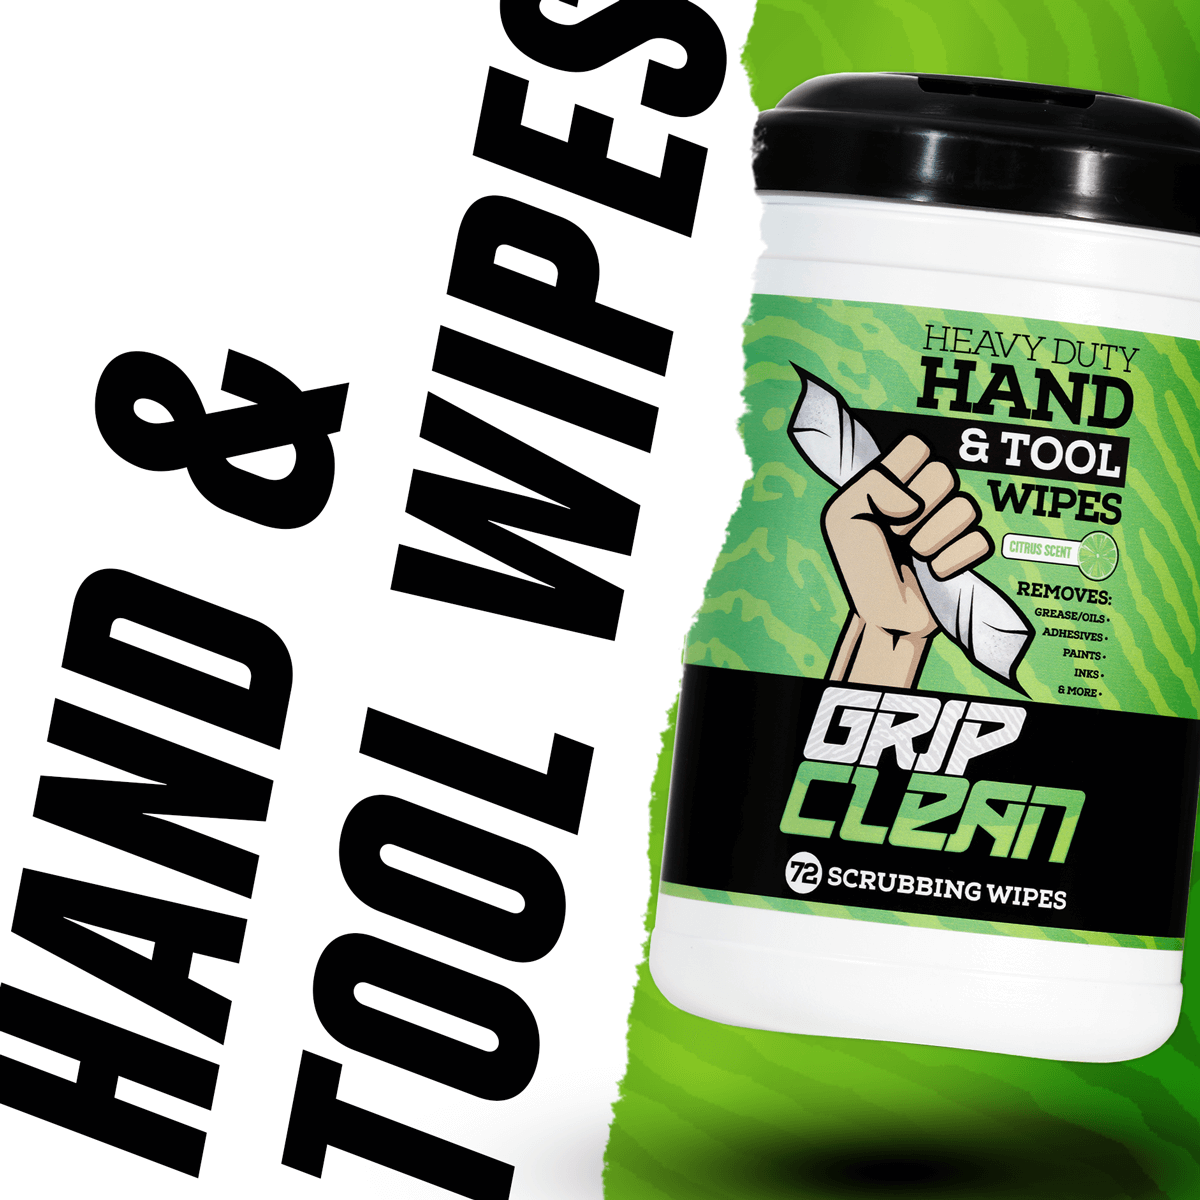 RopeSoapNDope. Grip Clean All-Natural Hand Soap 8 oz. Tube